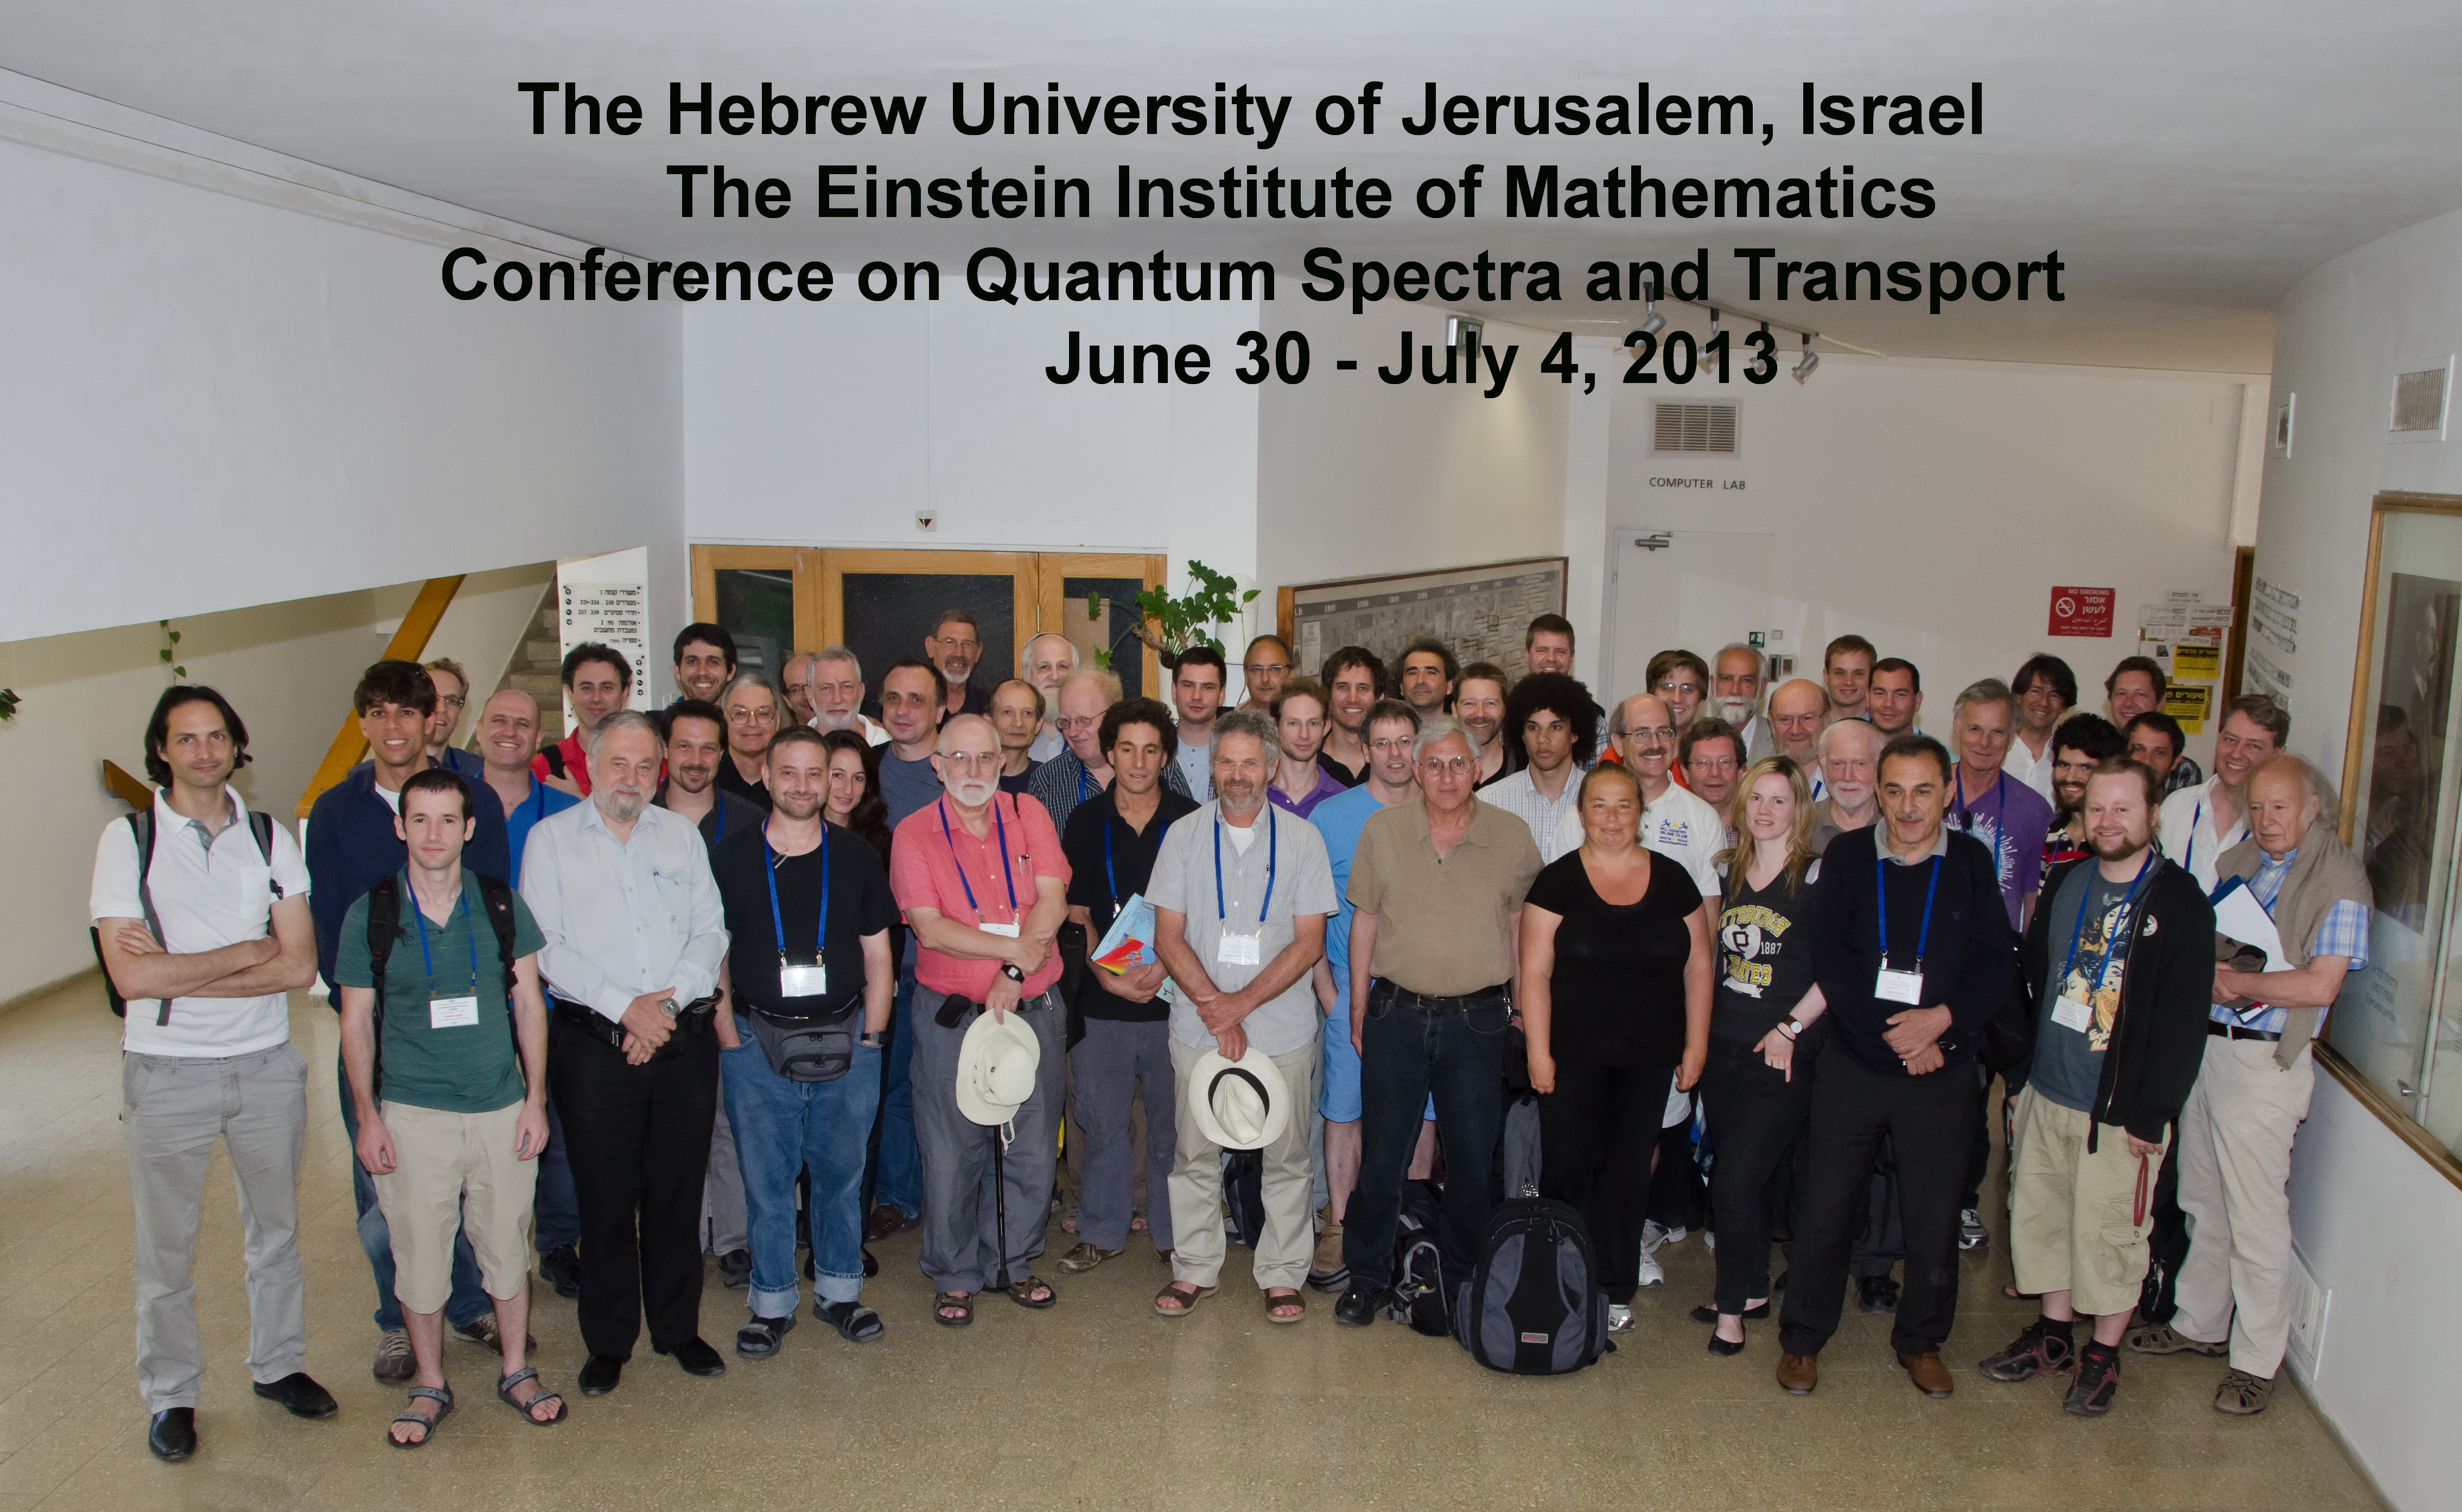 Participants in the quantum spectra and transport conference, Jerusalem 2013